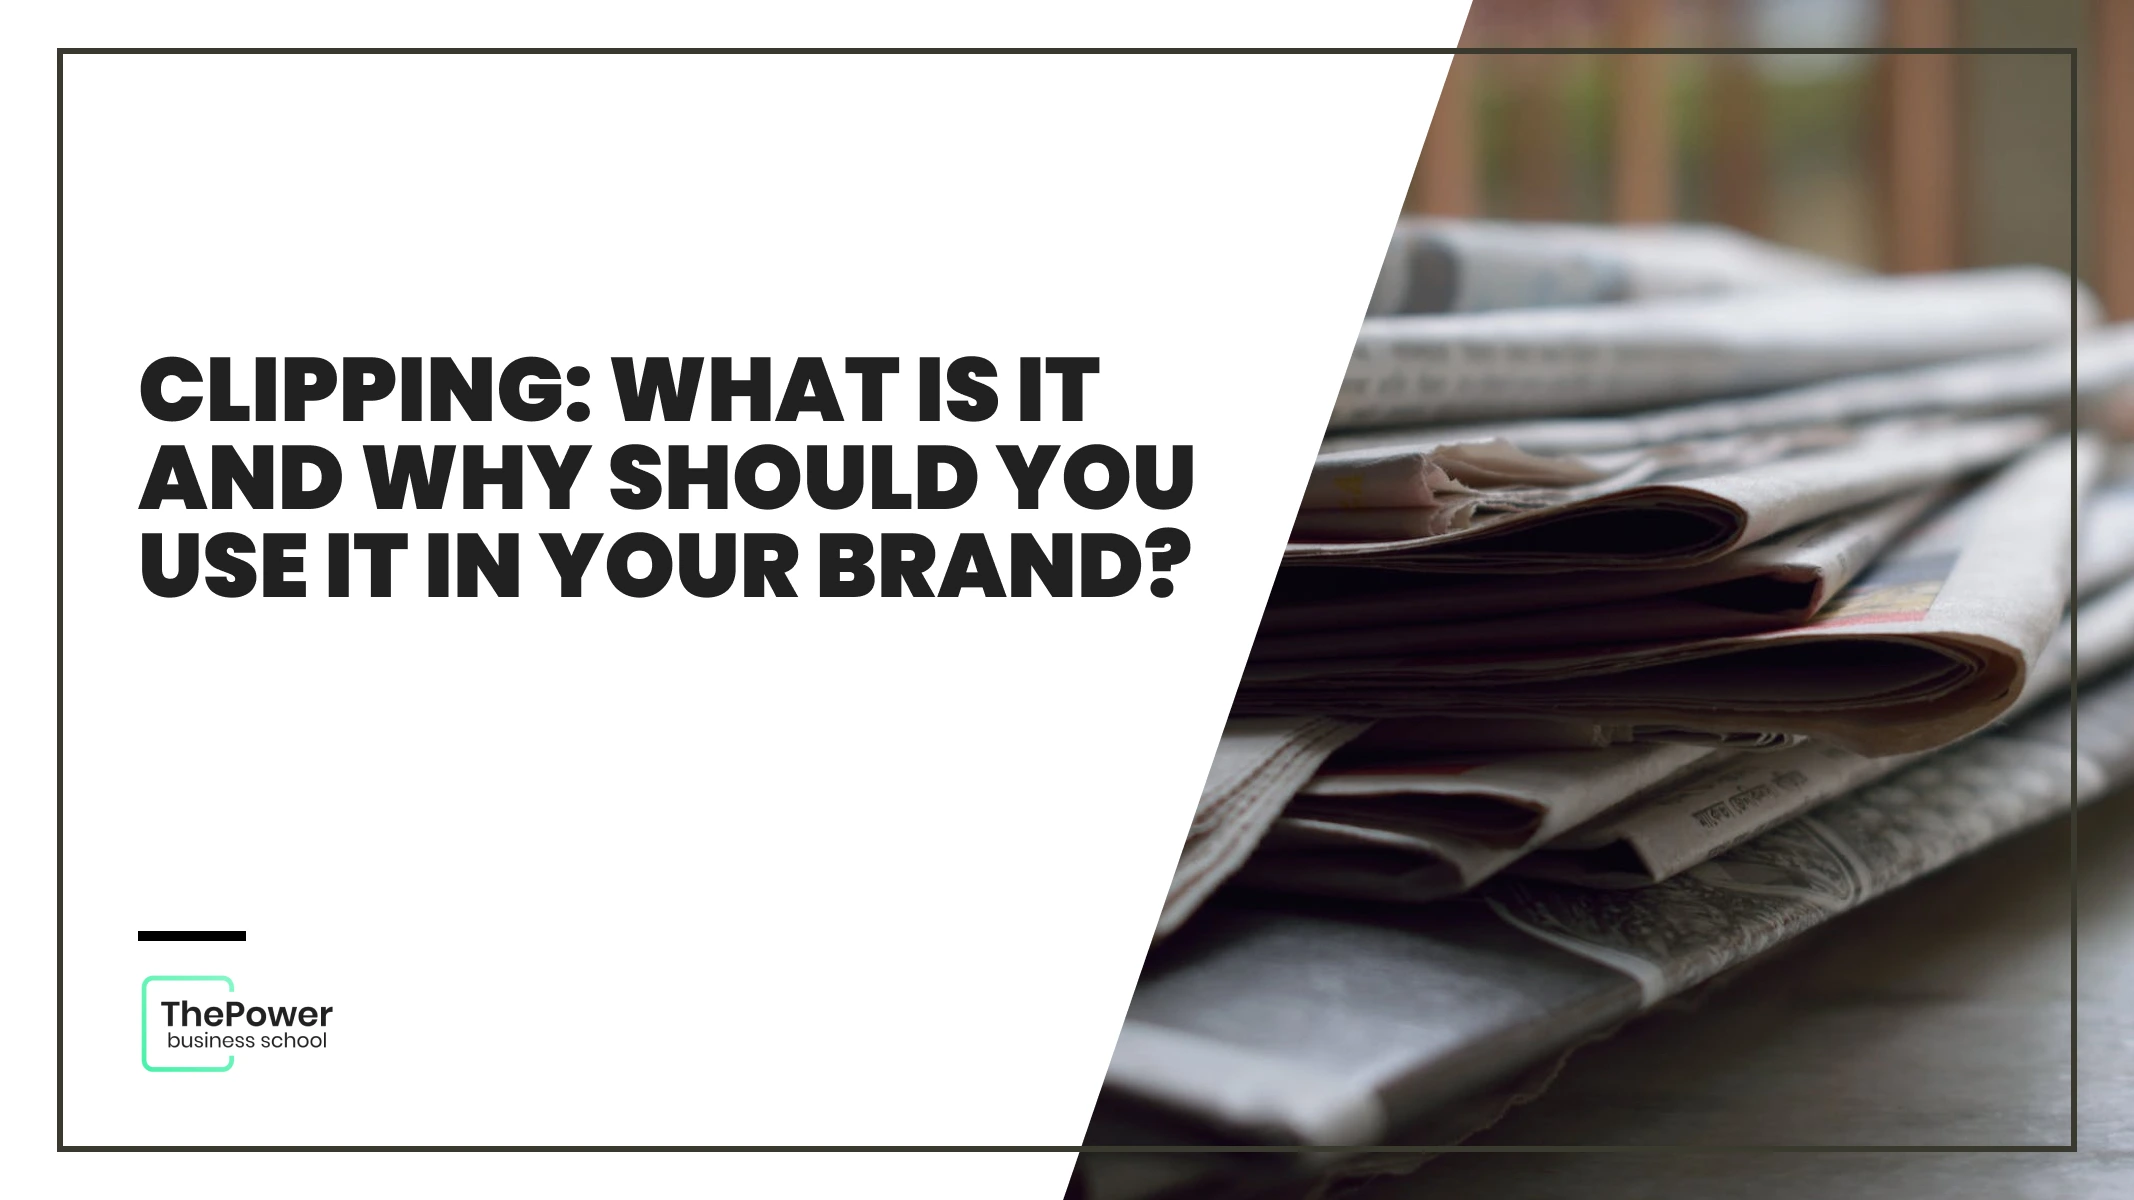 Clipping: What is it and why should you use it in your brand?